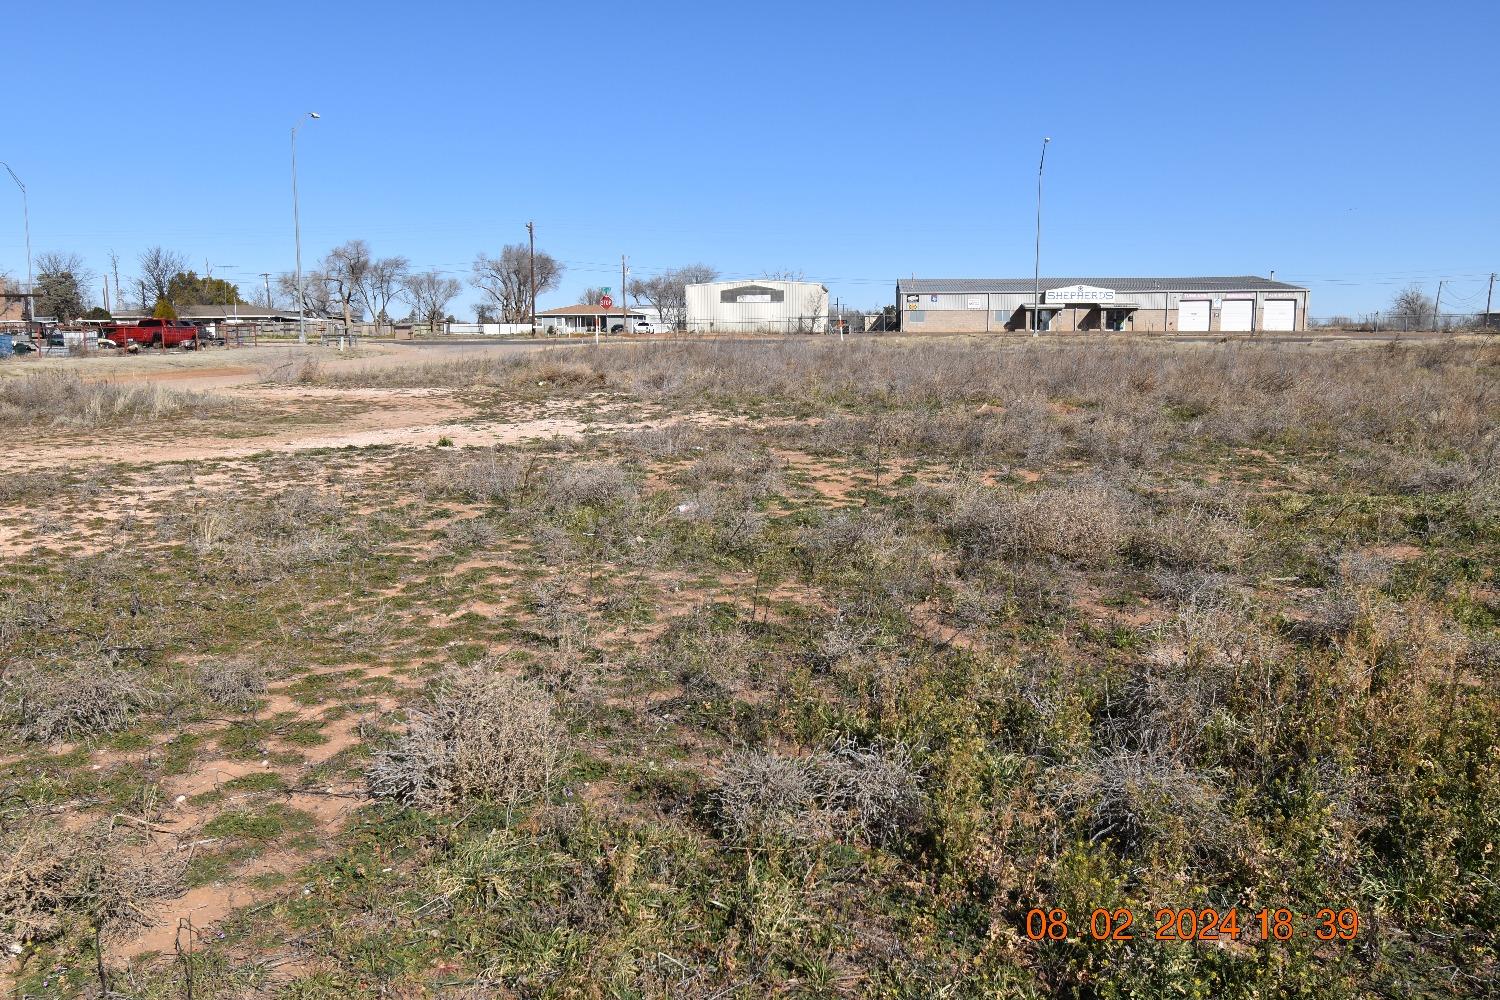 Large 2.46 acre lot, partially cleared and ready for construction, between 2 areas that area currently under development and construction multi-family and single family residential housing. City water available at the north boundary of the lot. Seller will subdivide.